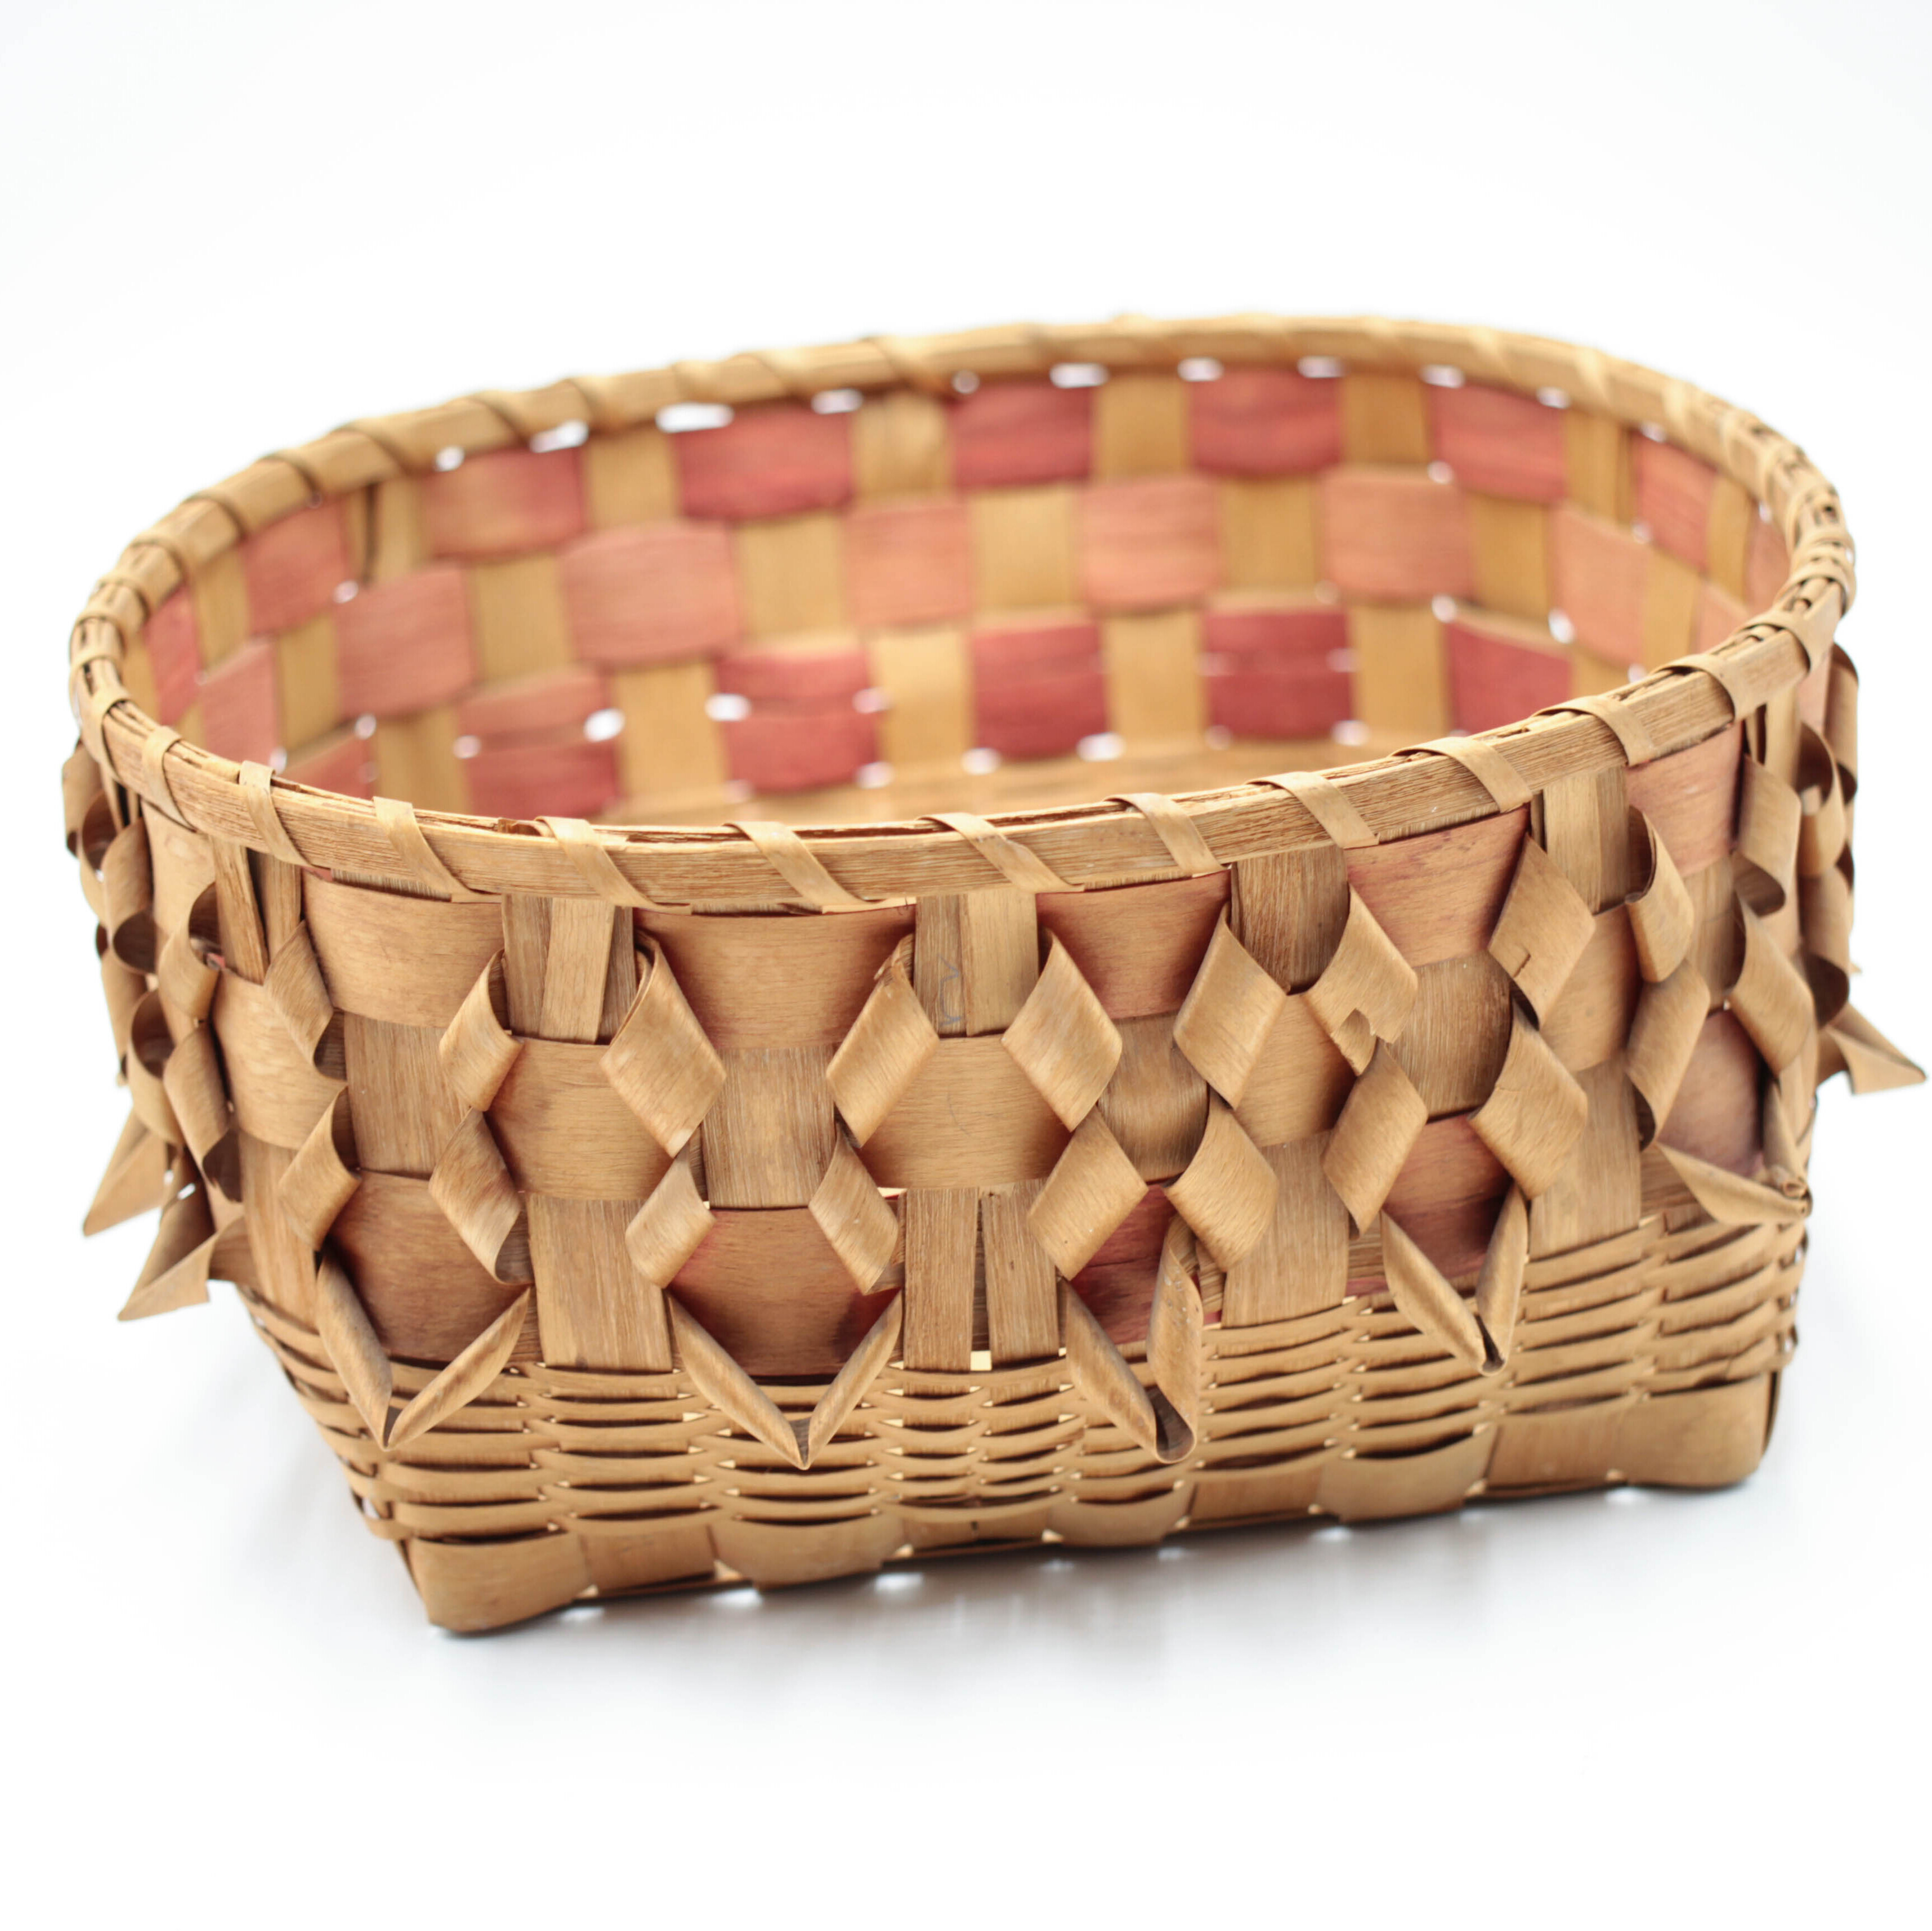 woven basket with red highlights